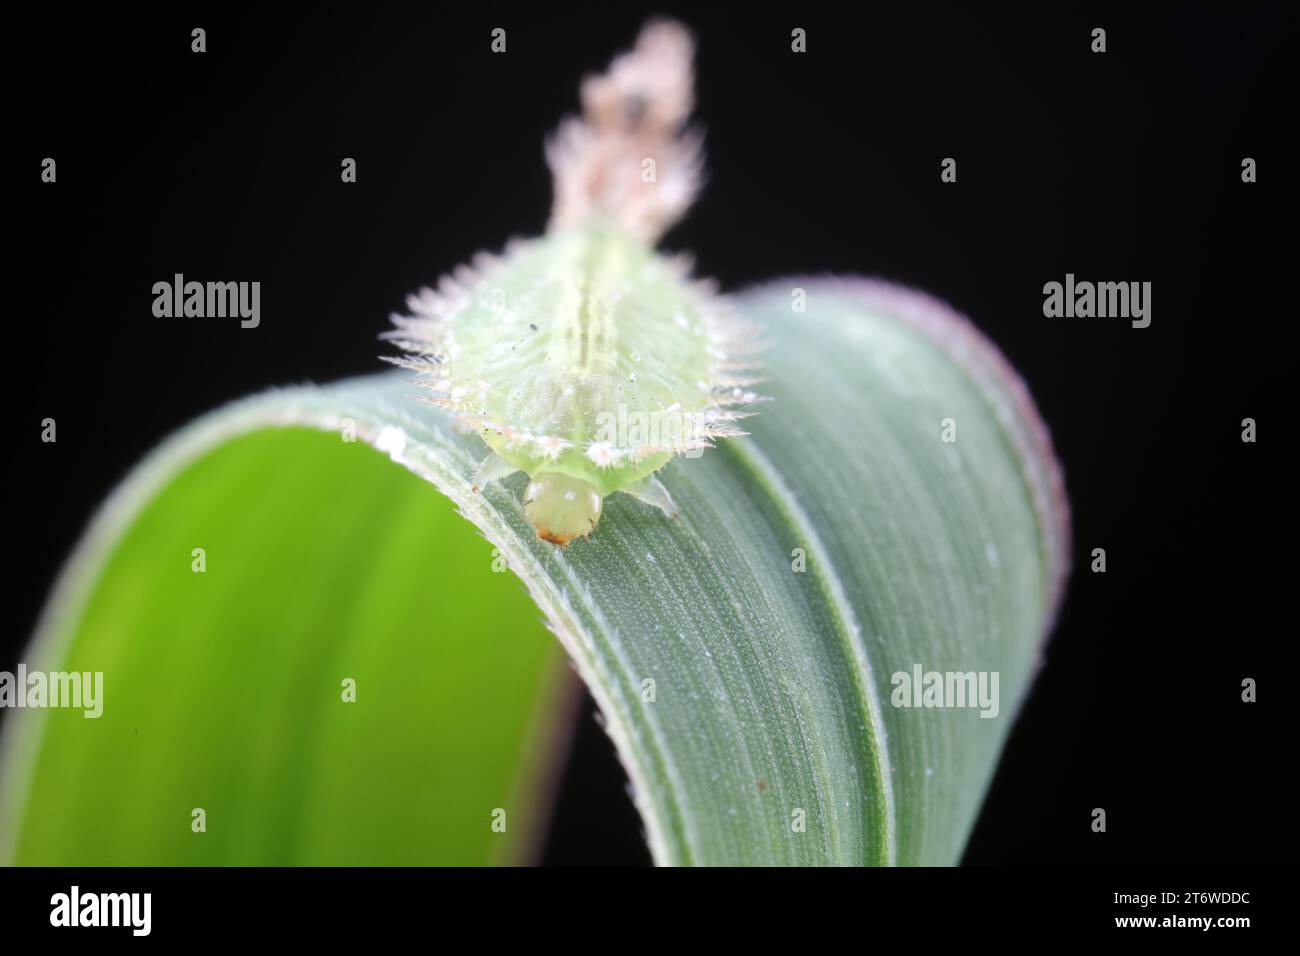 Carabidae insect larva live on green leaves Stock Photo